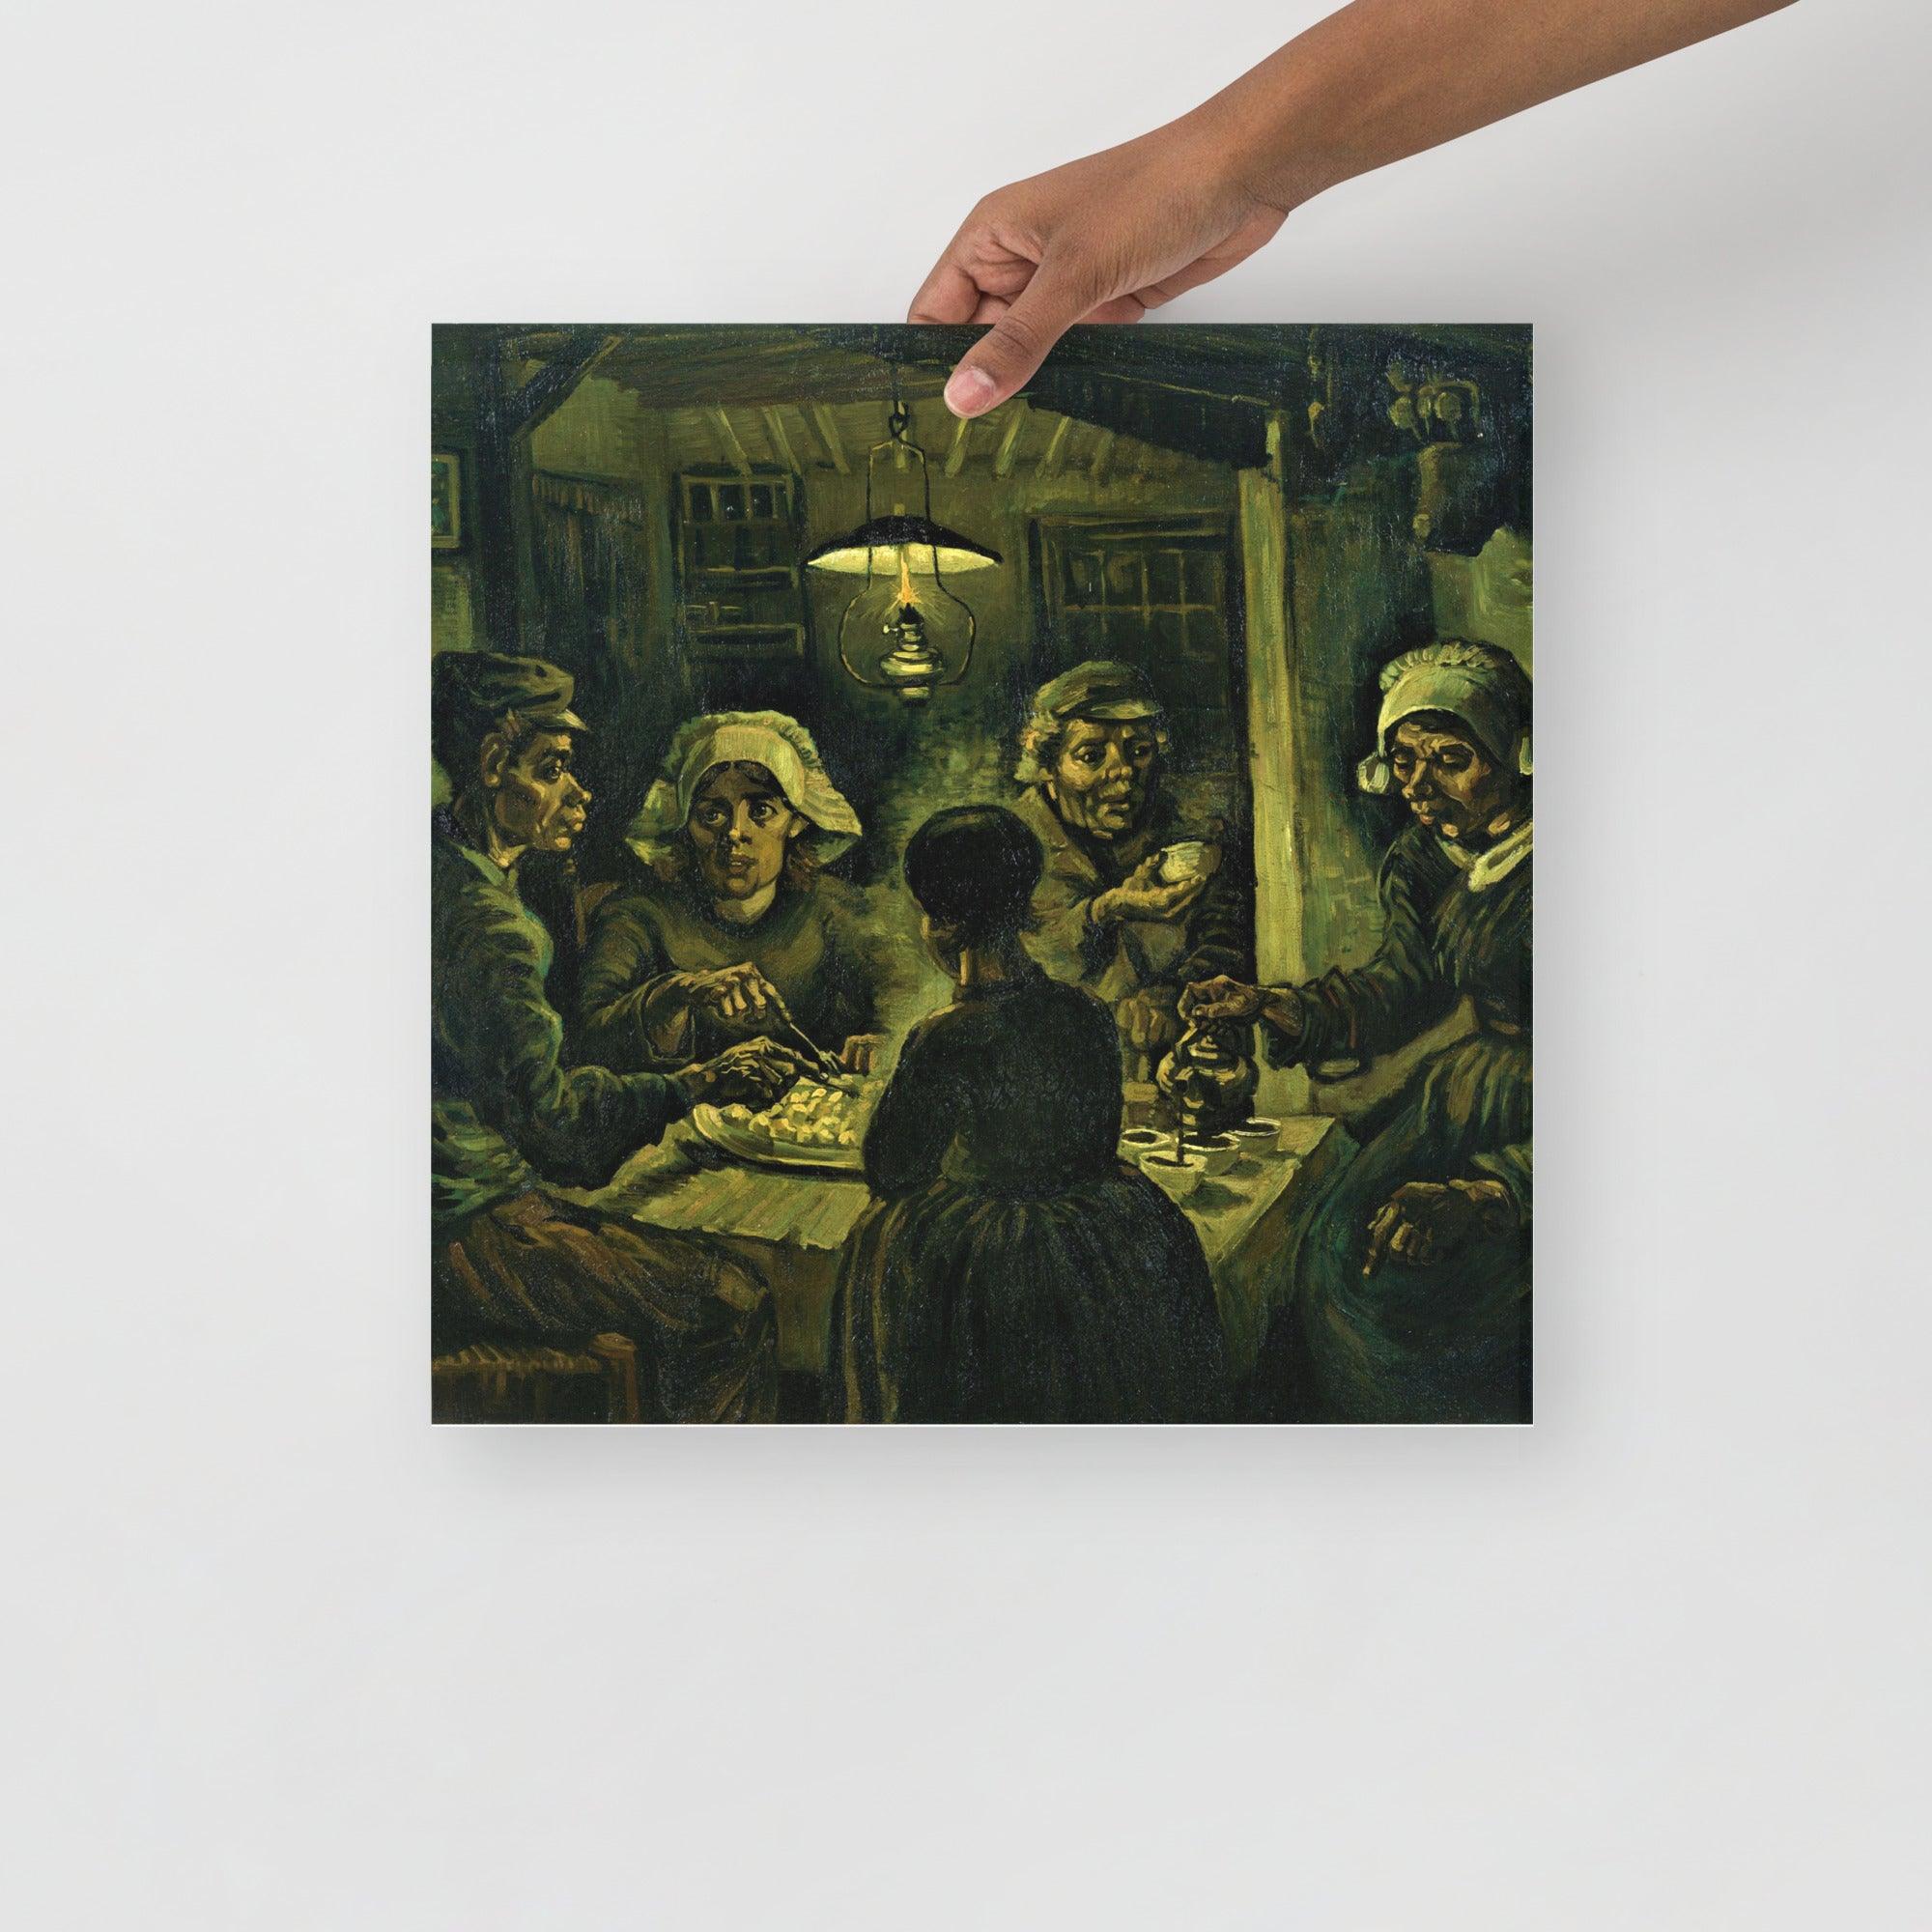 The Potato Eaters by Vincent van Gogh poster on a plain backdrop in size16x16”.